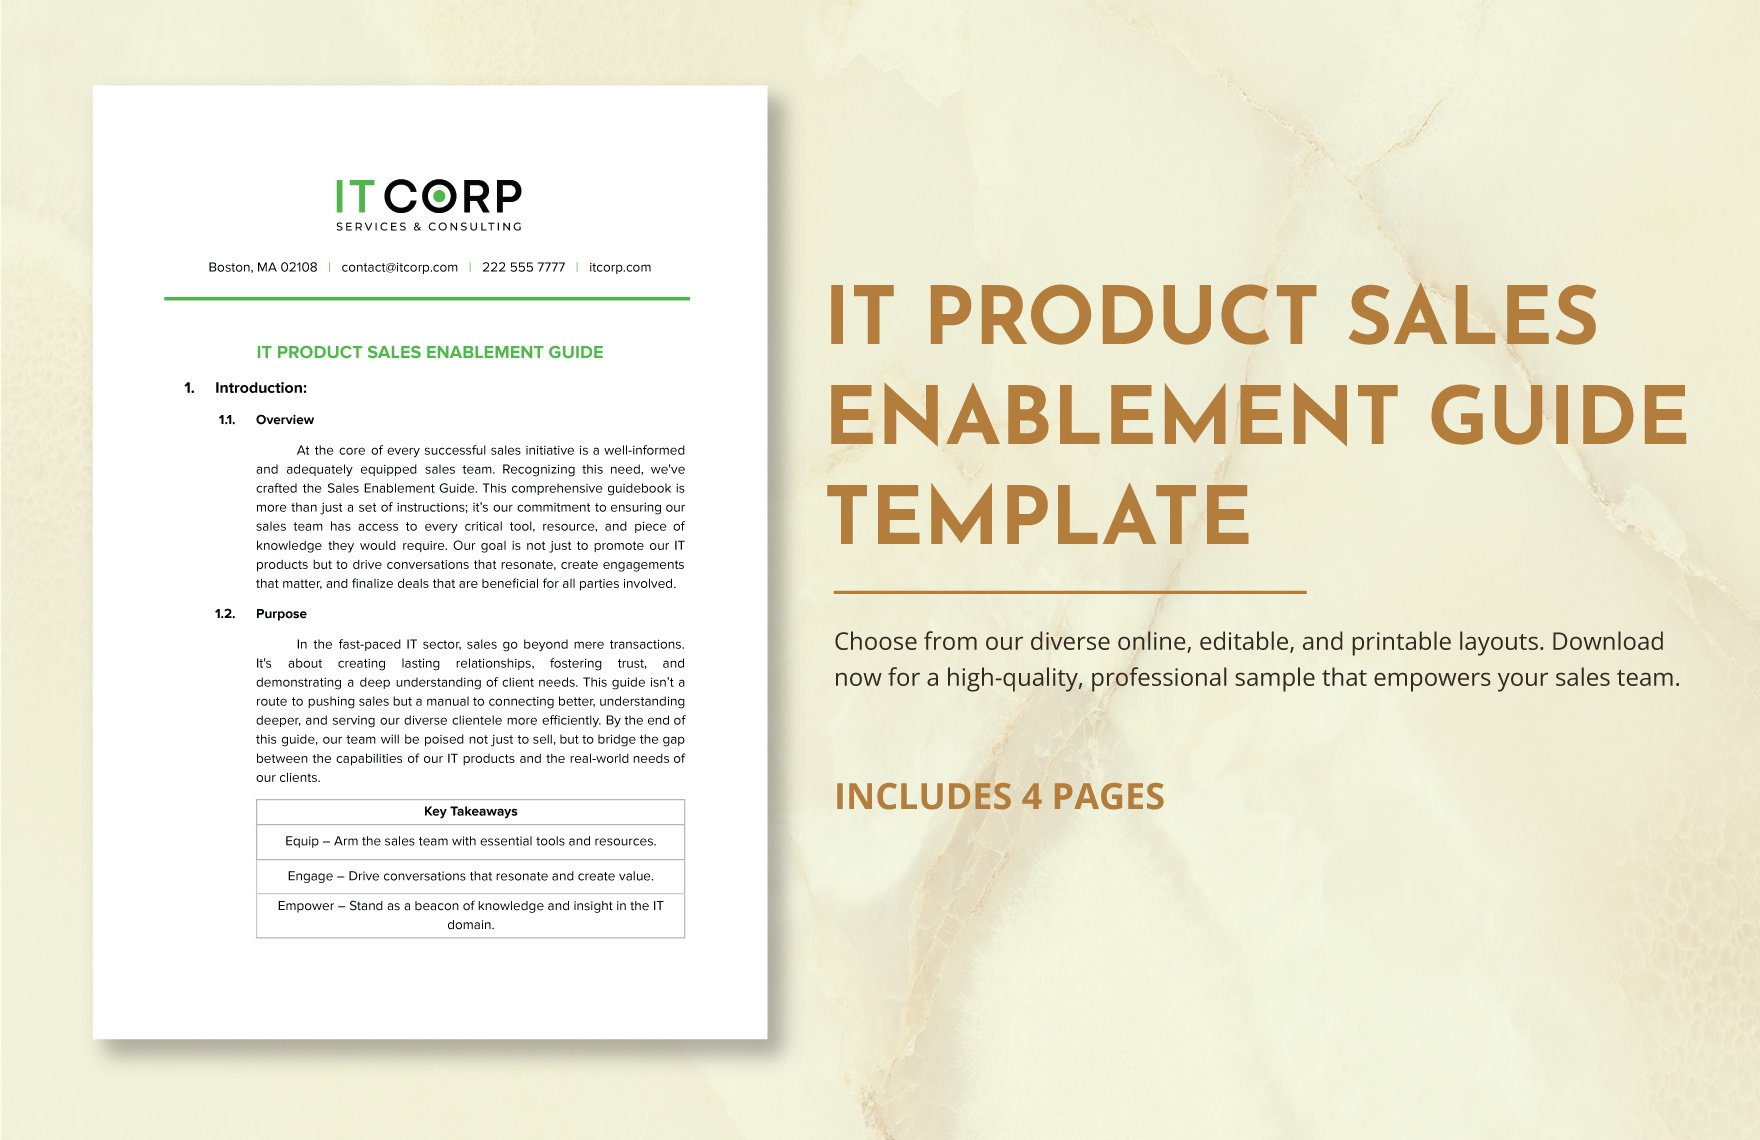 IT Product Sales Enablement Guide Template in Word, Google Docs, PDF